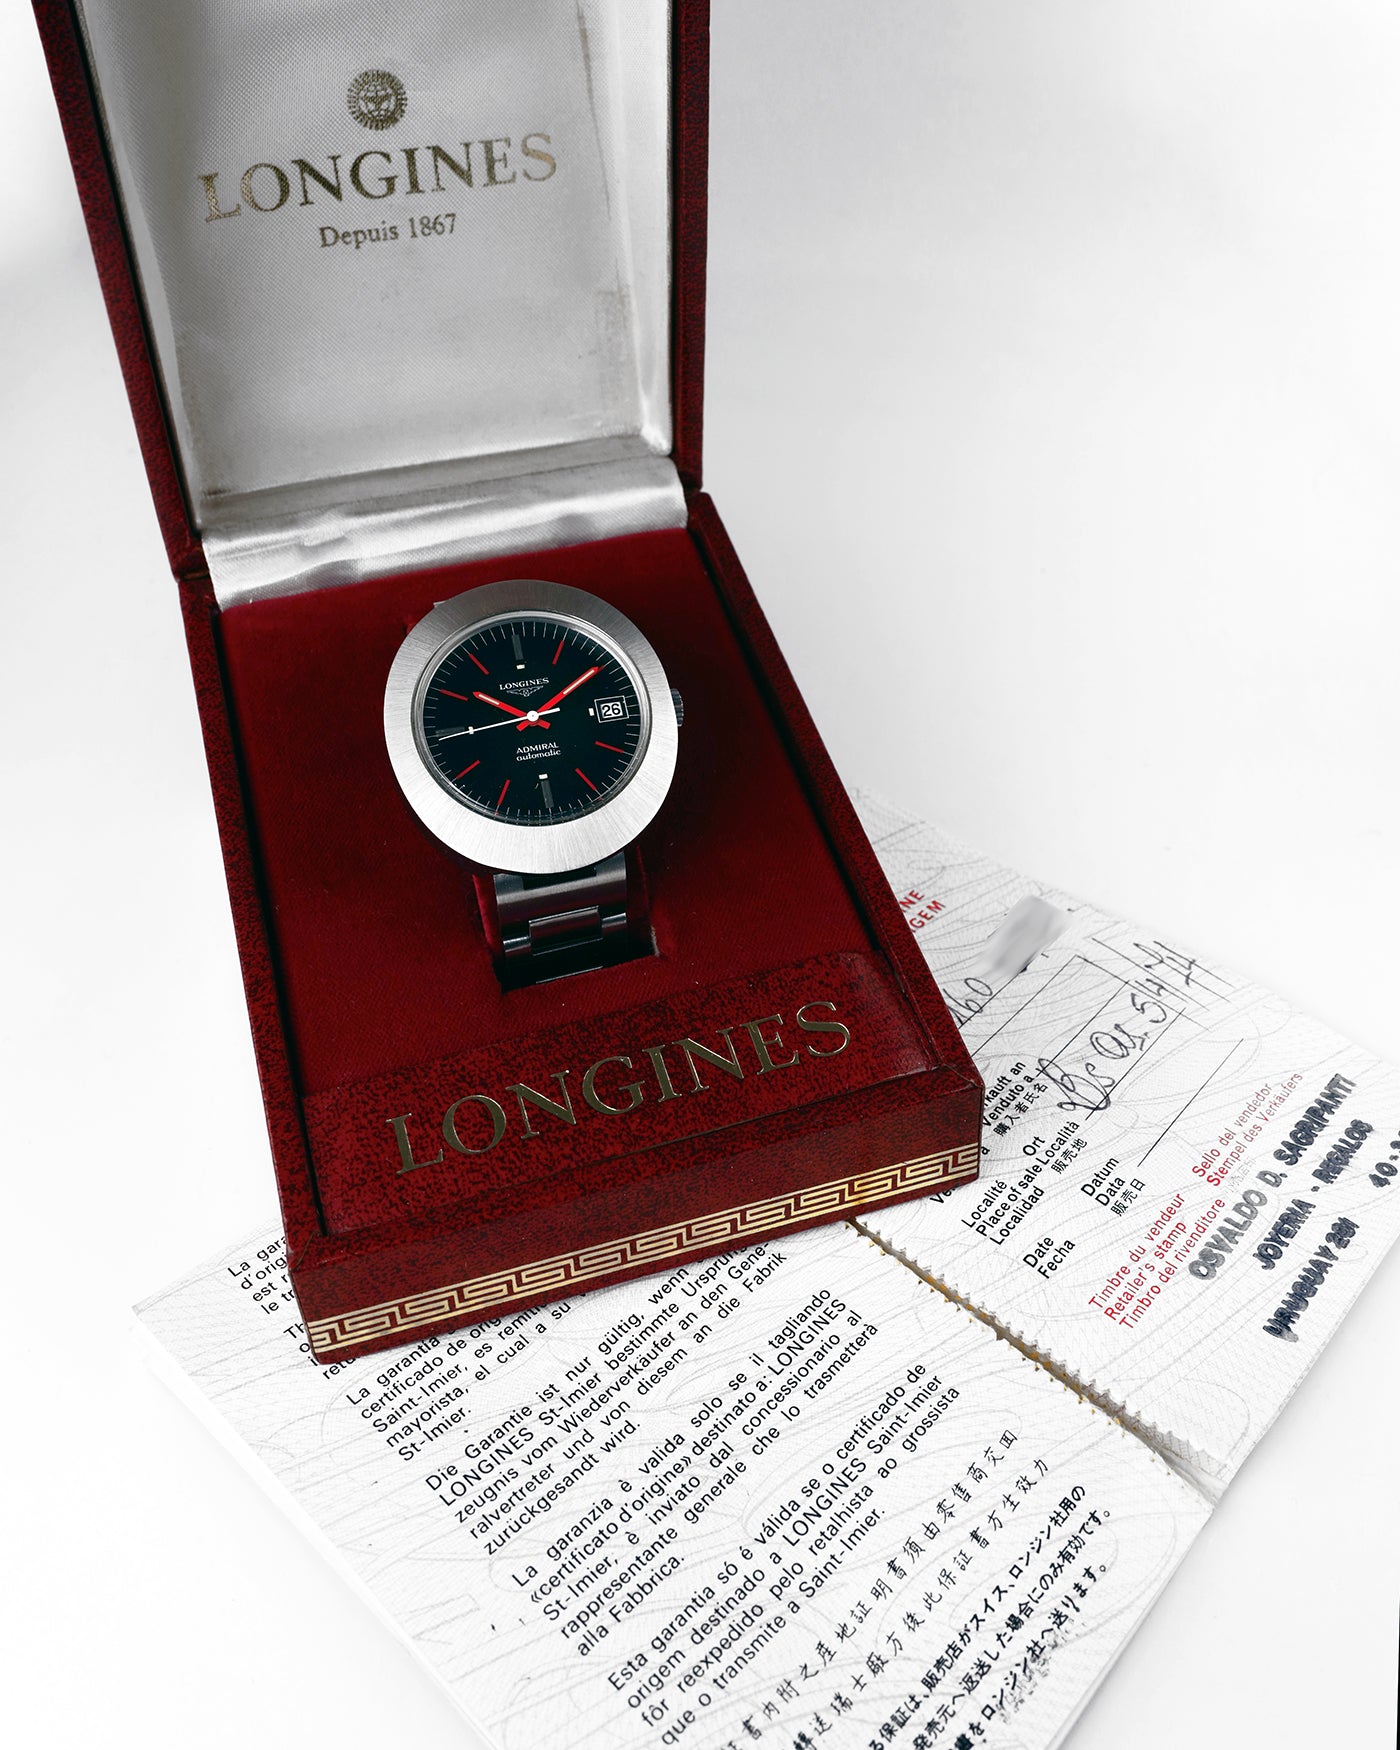 *NOS* 1974 Longines Admiral | Disco Volante | high-beat 36.600 vph | Cal. 431 | Box and Papers